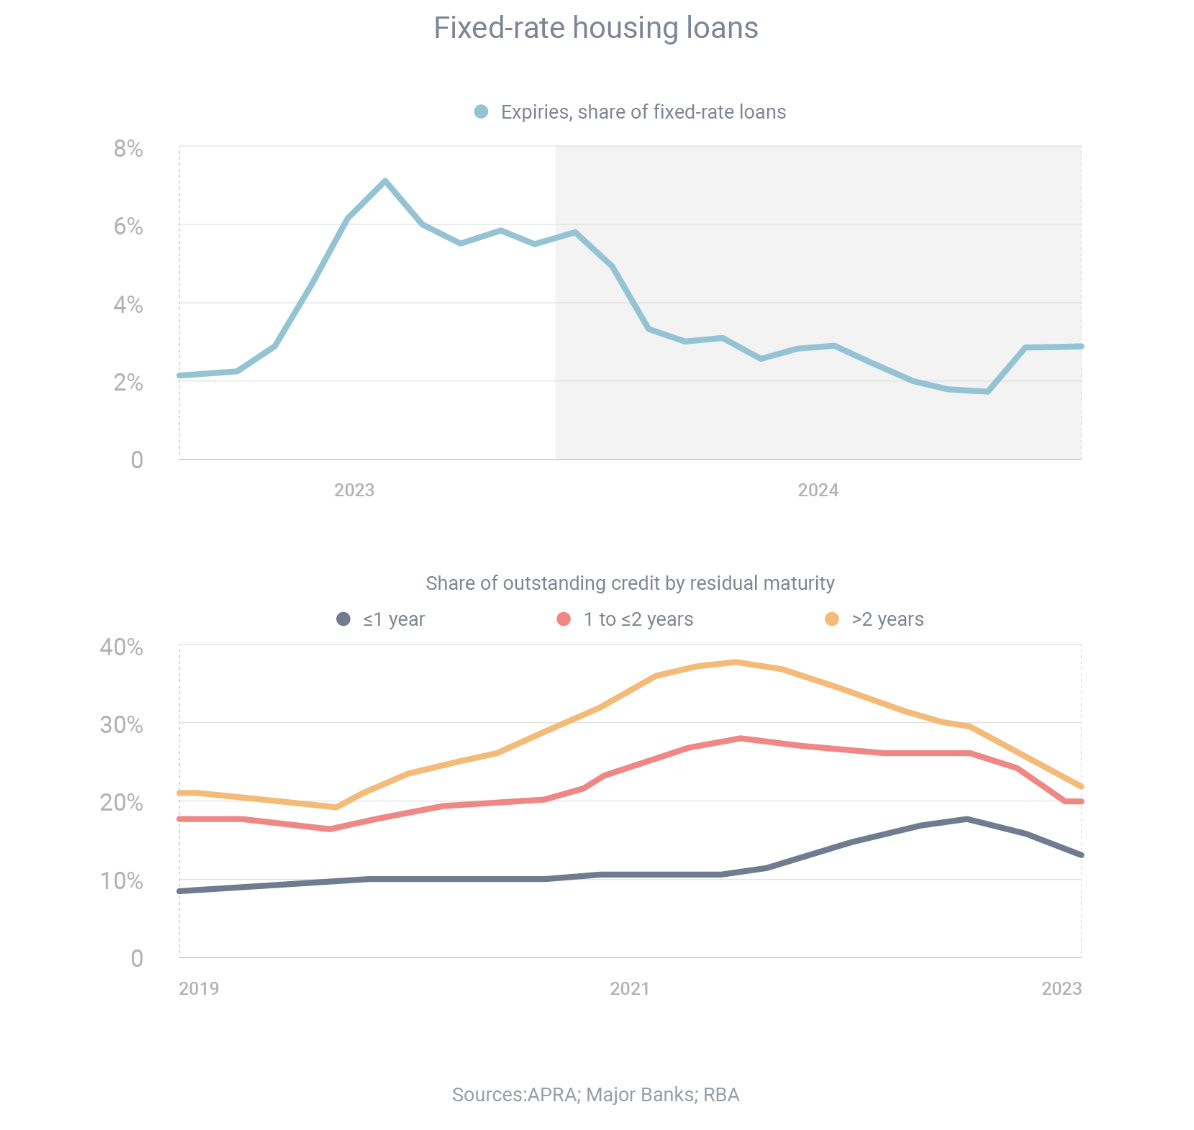 Interest Rates: Fixed-rate housing loans